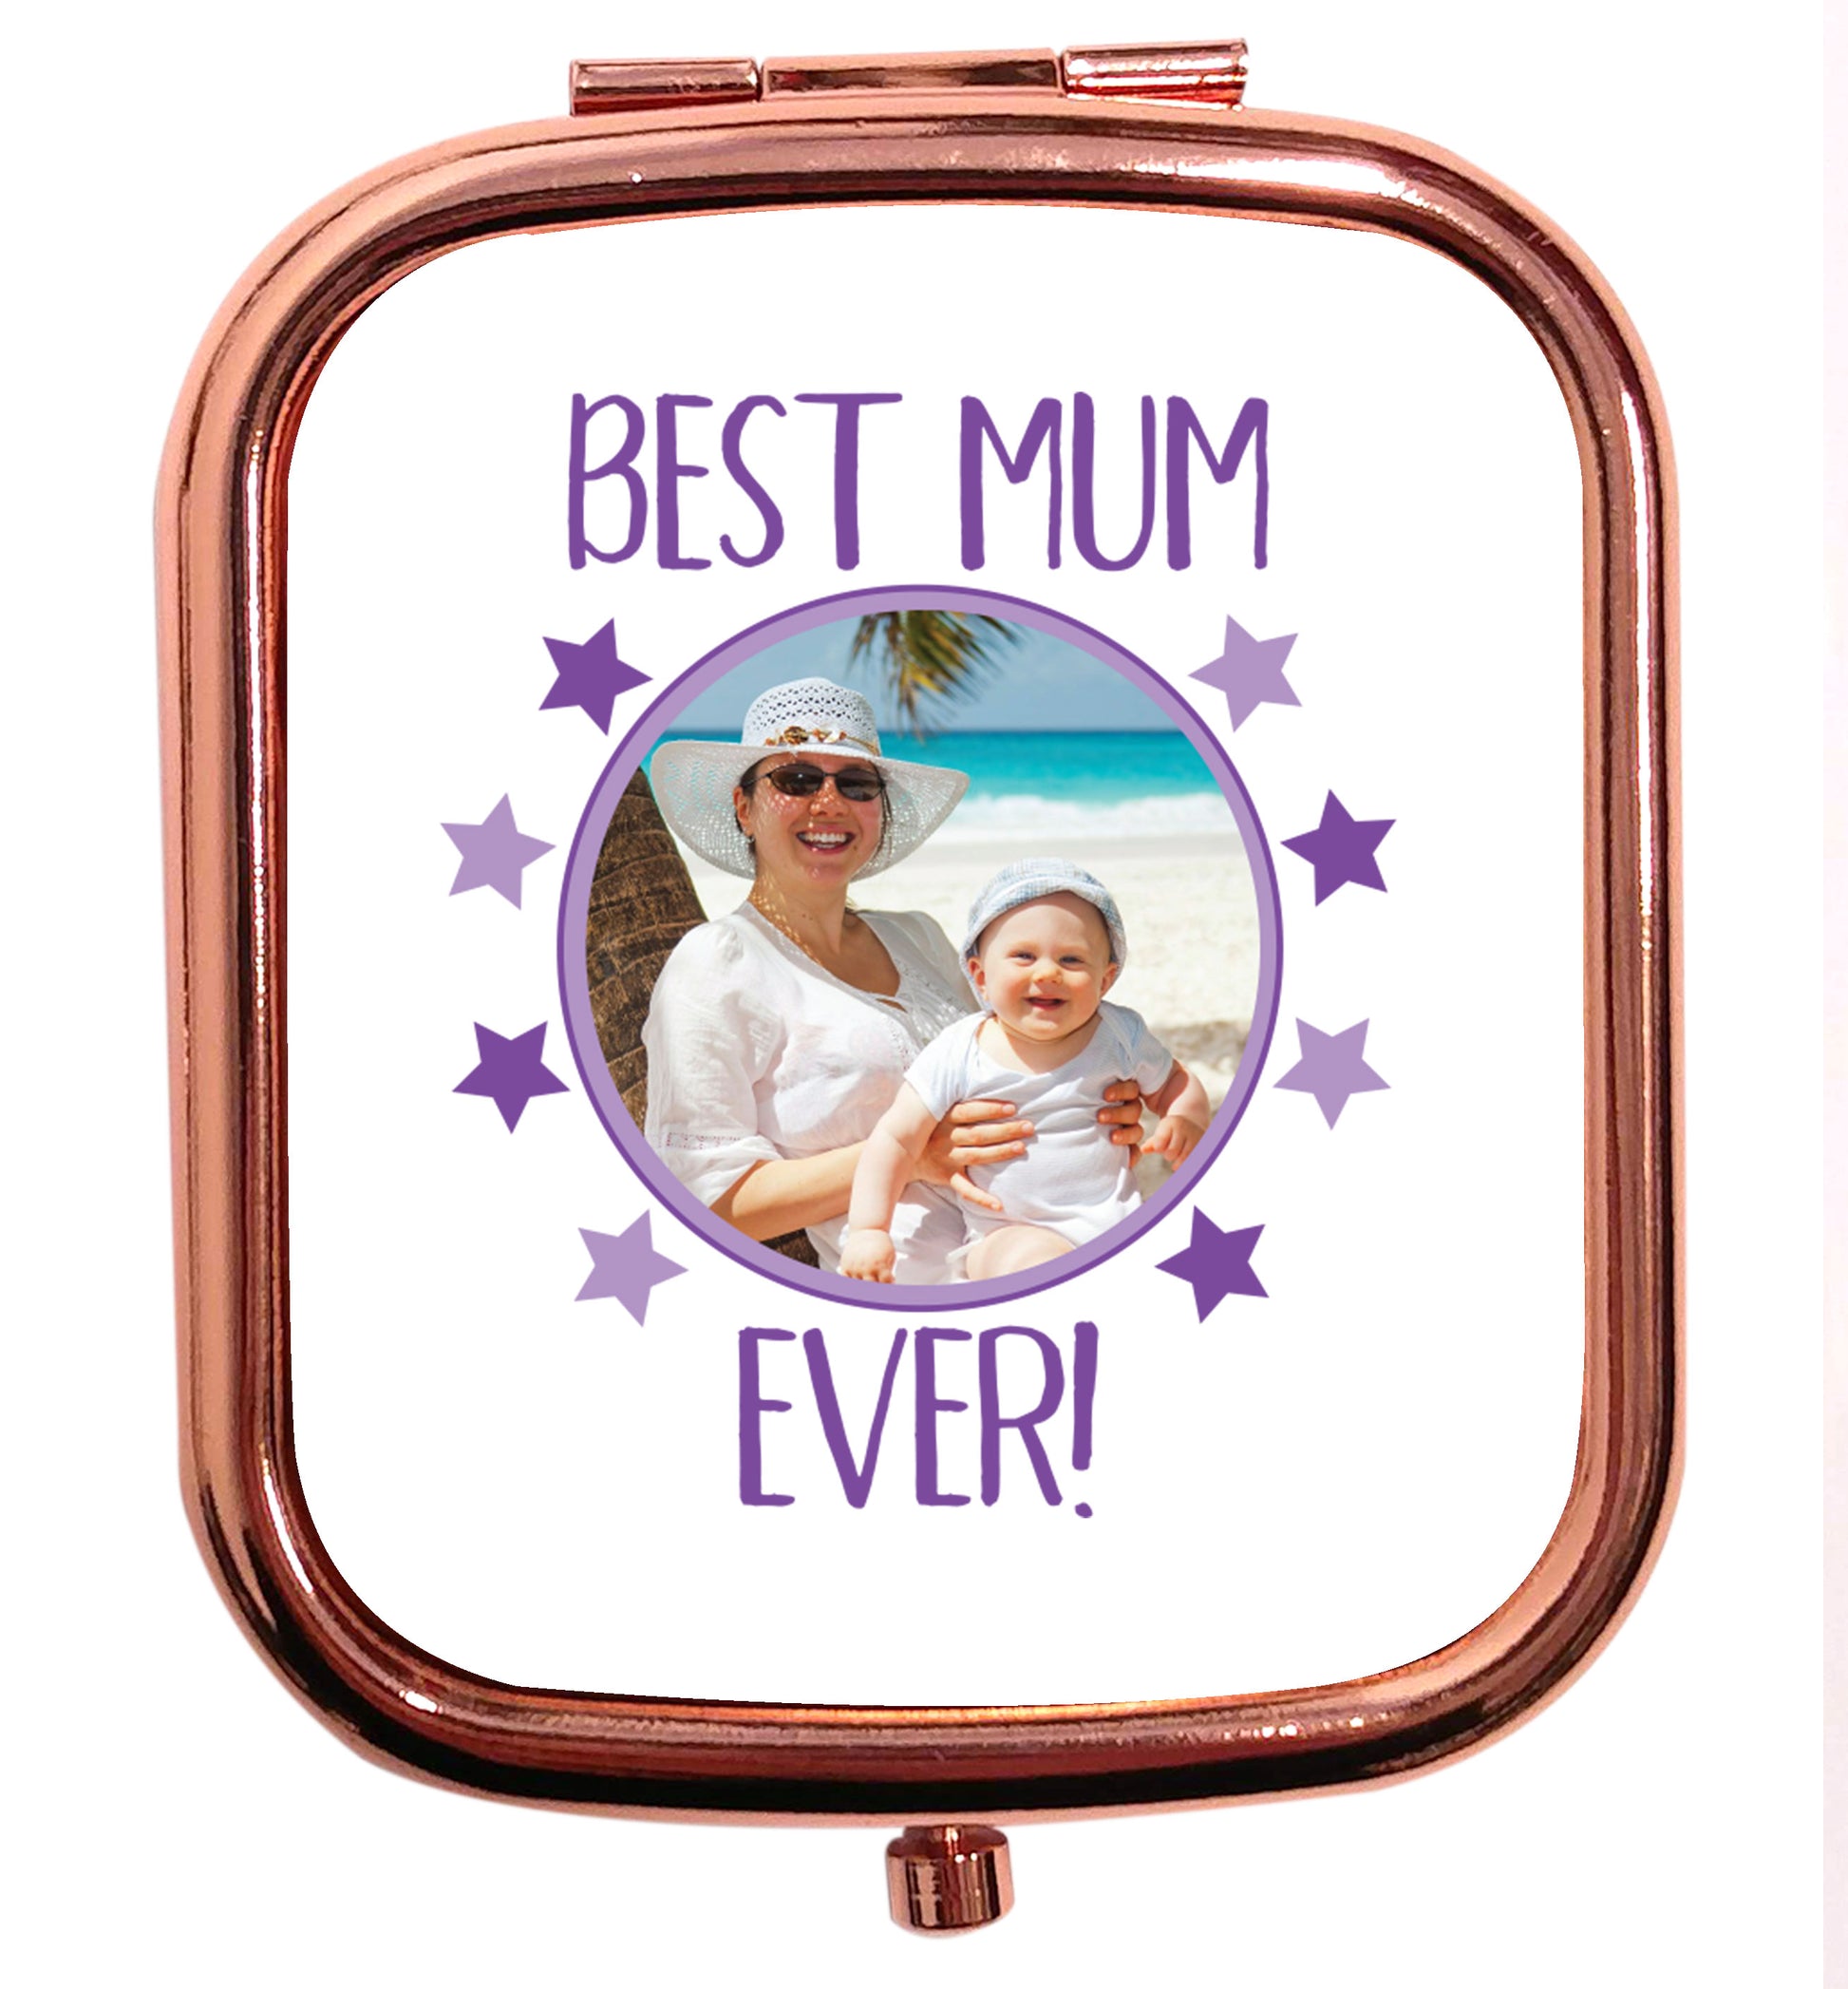 Personalised gift for mother's day use your own photo! Best mum ever! rose gold square pocket mirror